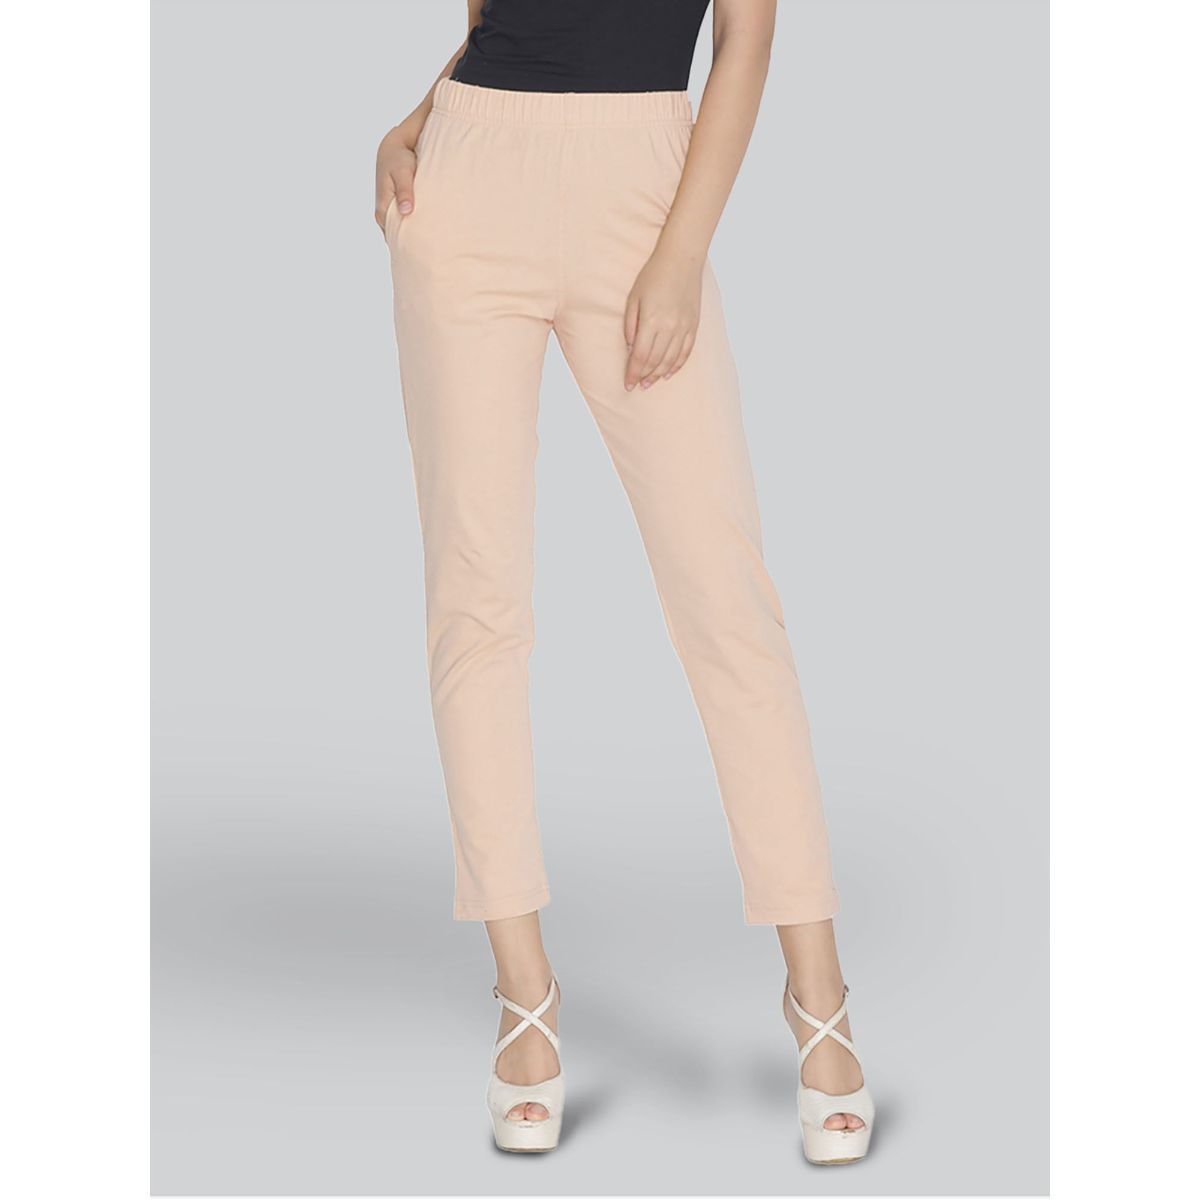 Girls Trouser - Buy Girls Trouser Online in India at Best Price [Latest  2022 Girls Trousers]